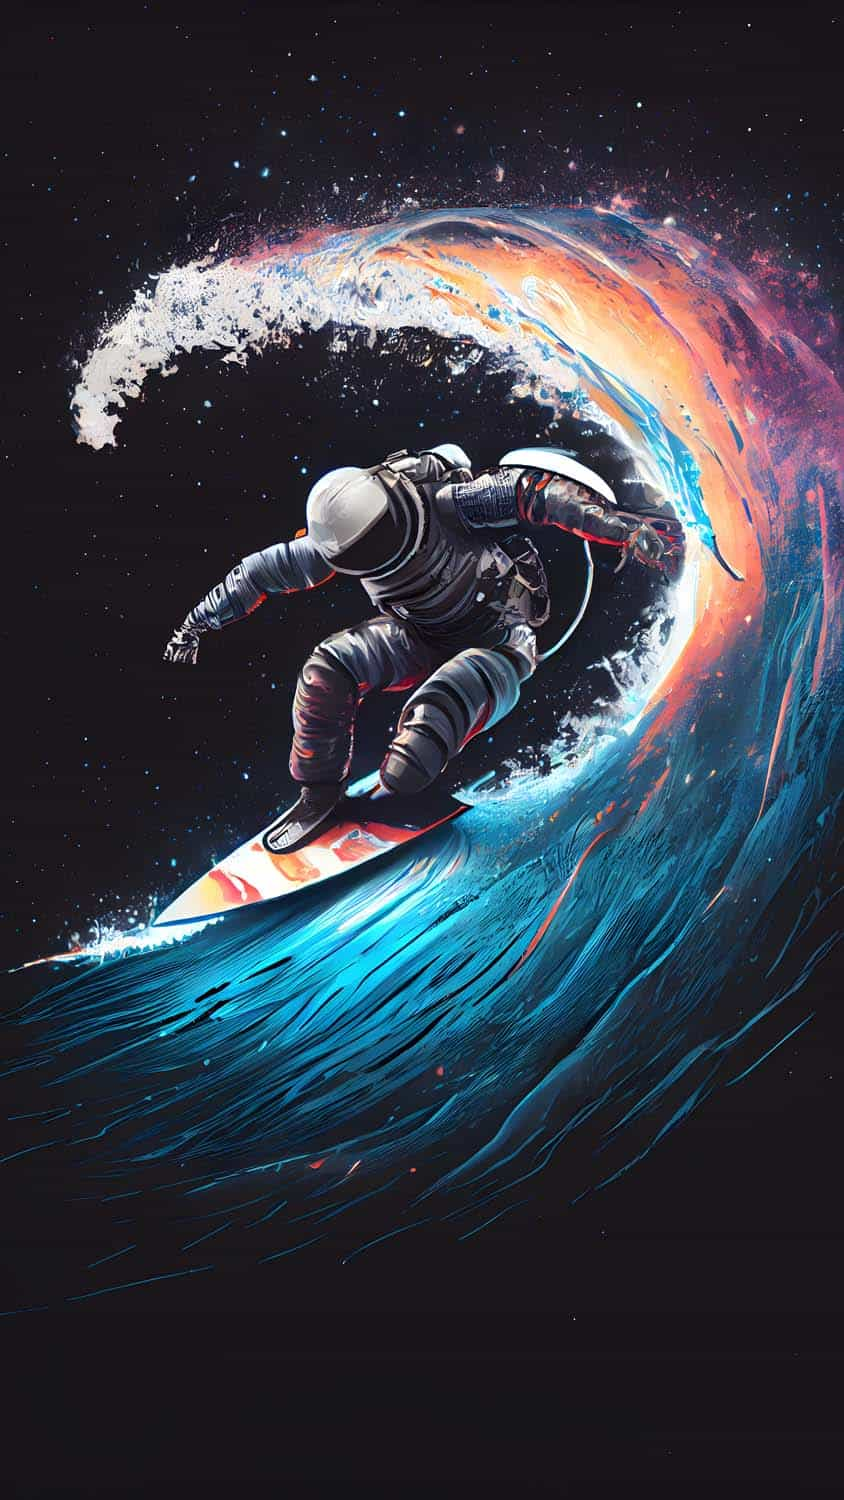 Astro Surfing IPhone Wallpaper HD  IPhone Wallpapers